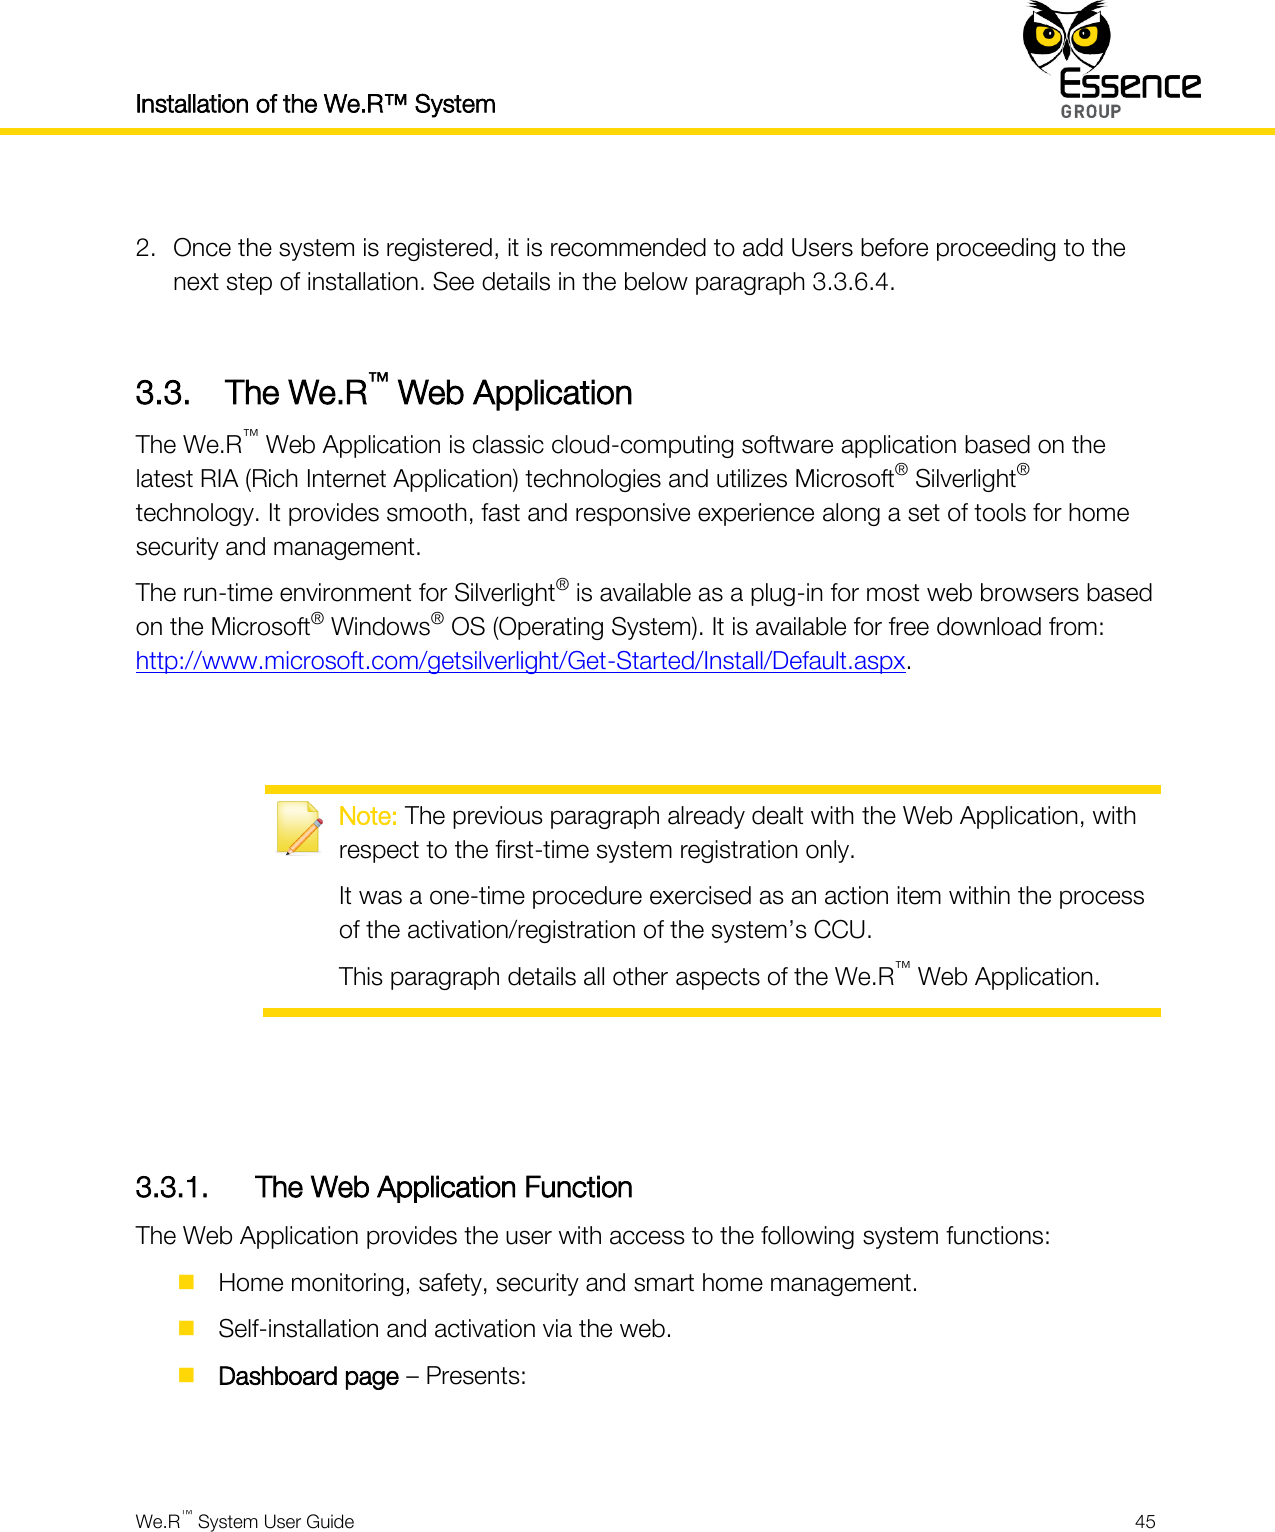 Installation of the We.R™ System    We.R™ System User Guide  45   2. Once the system is registered, it is recommended to add Users before proceeding to the next step of installation. See details in the below paragraph 3.3.6.4.  3.3. The We.R™ Web Application The We.R™ Web Application is classic cloud-computing software application based on the latest RIA (Rich Internet Application) technologies and utilizes Microsoft® Silverlight® technology. It provides smooth, fast and responsive experience along a set of tools for home security and management. The run-time environment for Silverlight® is available as a plug-in for most web browsers based on the Microsoft® Windows® OS (Operating System). It is available for free download from: http://www.microsoft.com/getsilverlight/Get-Started/Install/Default.aspx.    Note: The previous paragraph already dealt with the Web Application, with respect to the first-time system registration only. It was a one-time procedure exercised as an action item within the process of the activation/registration of the system’s CCU. This paragraph details all other aspects of the We.R™ Web Application.    3.3.1. The Web Application Function The Web Application provides the user with access to the following system functions:  Home monitoring, safety, security and smart home management.  Self-installation and activation via the web.  Dashboard page – Presents:  